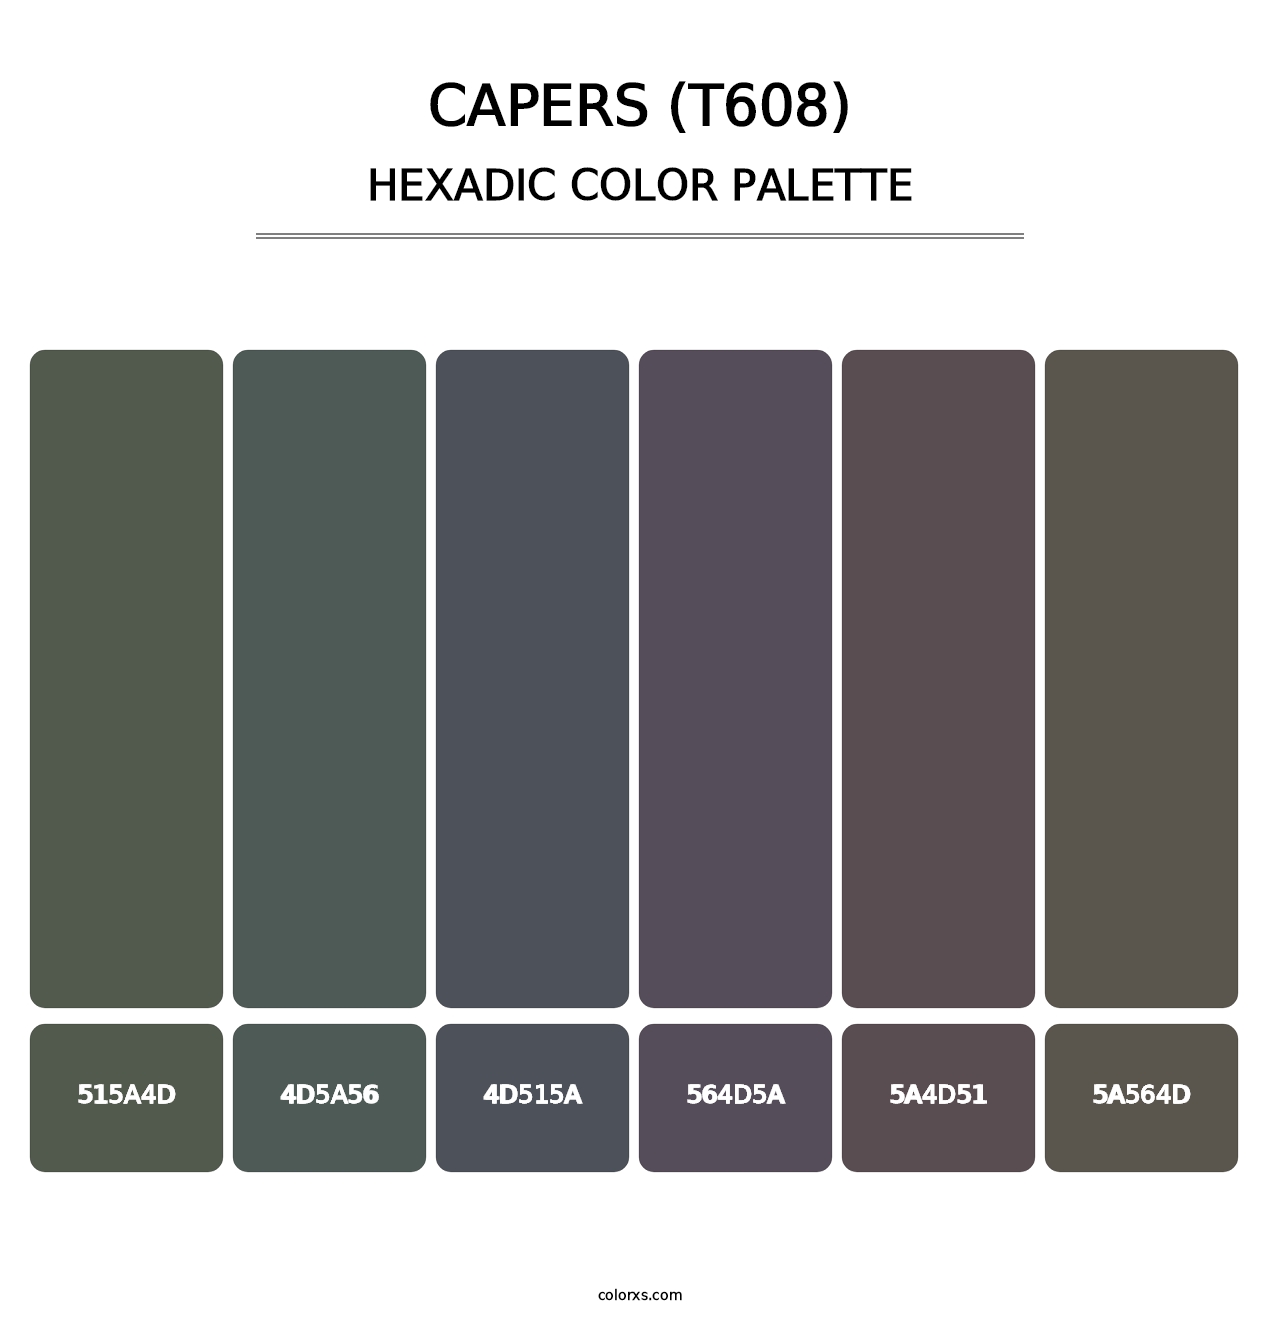 Capers (T608) - Hexadic Color Palette